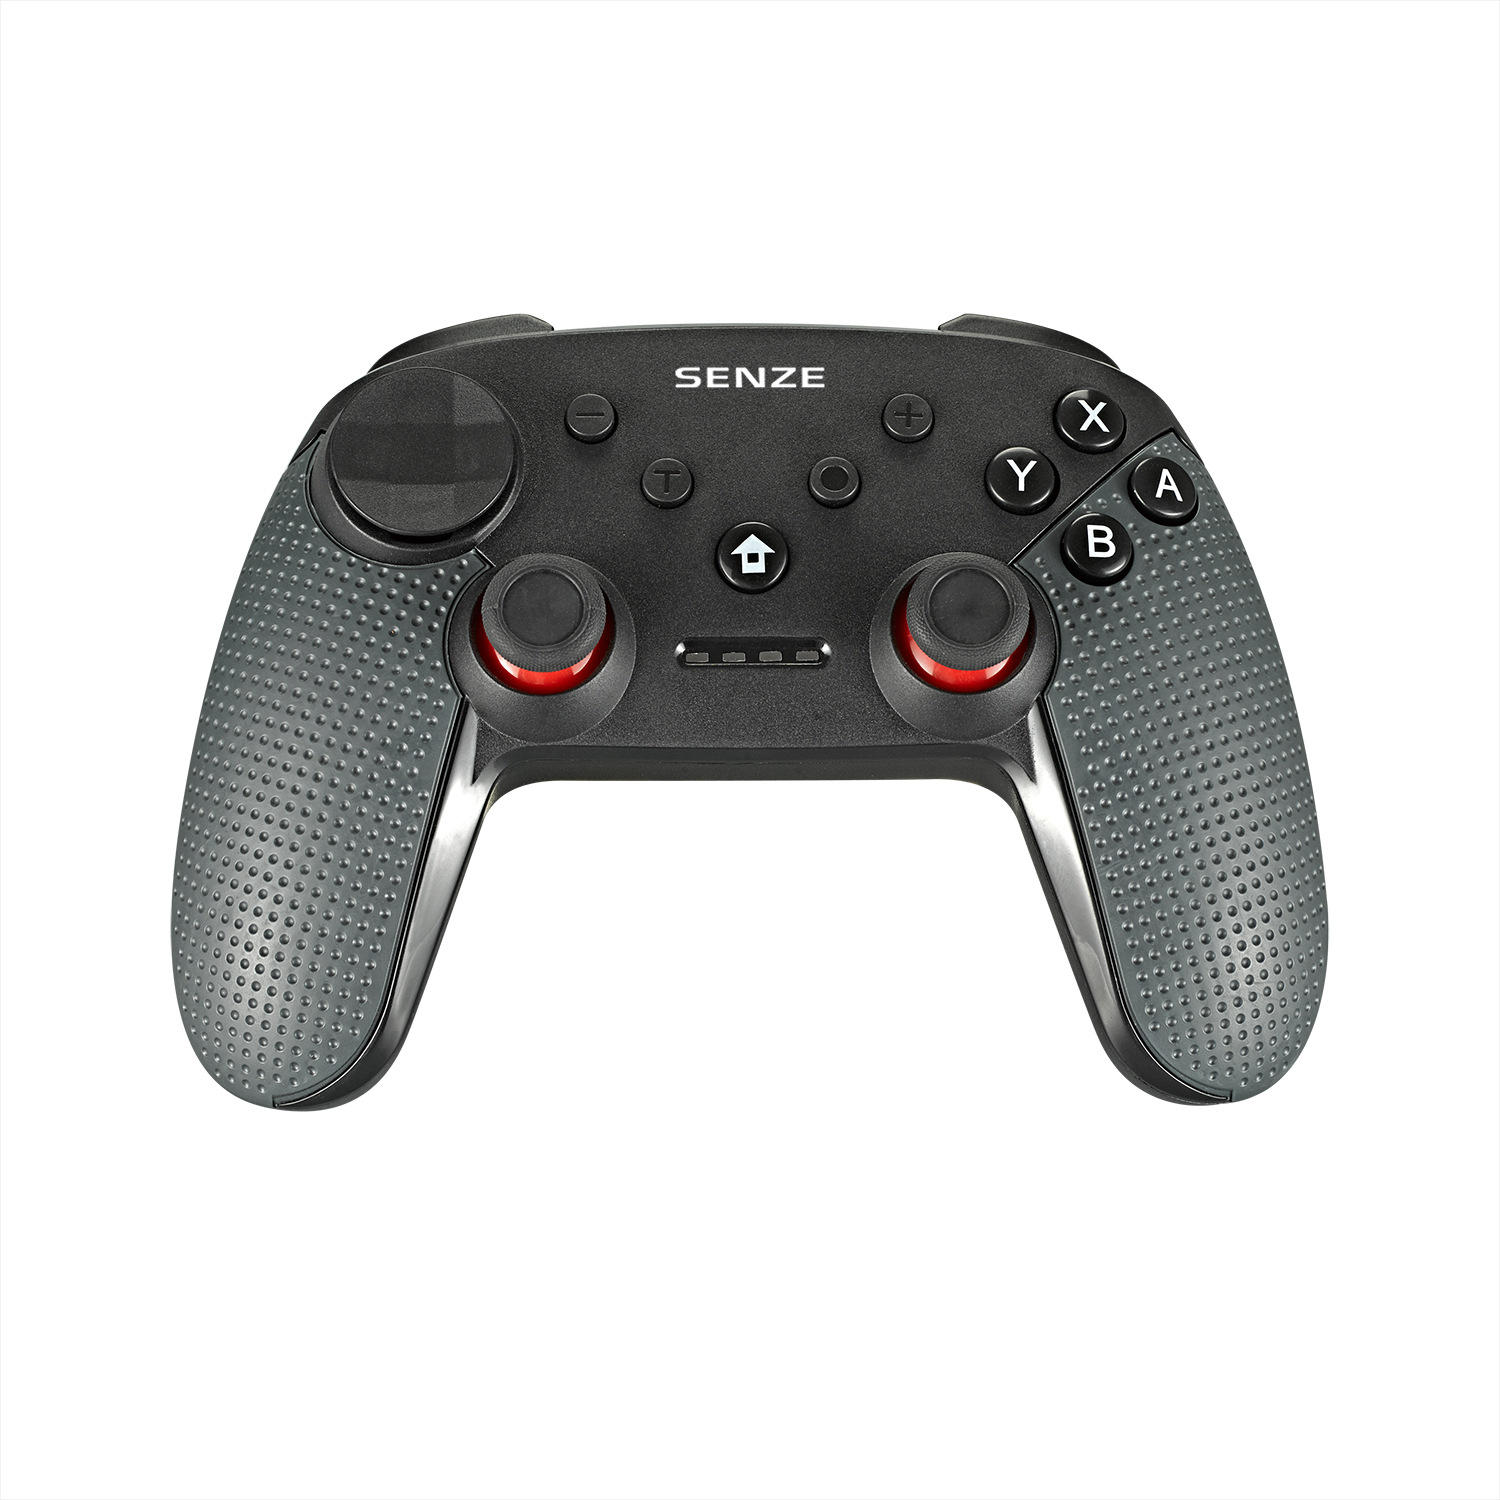 

Senze SZ-912B bluetooth Gamepad for Nintendo Switch Game Controller for Android for Playstation 3 PS3 PC